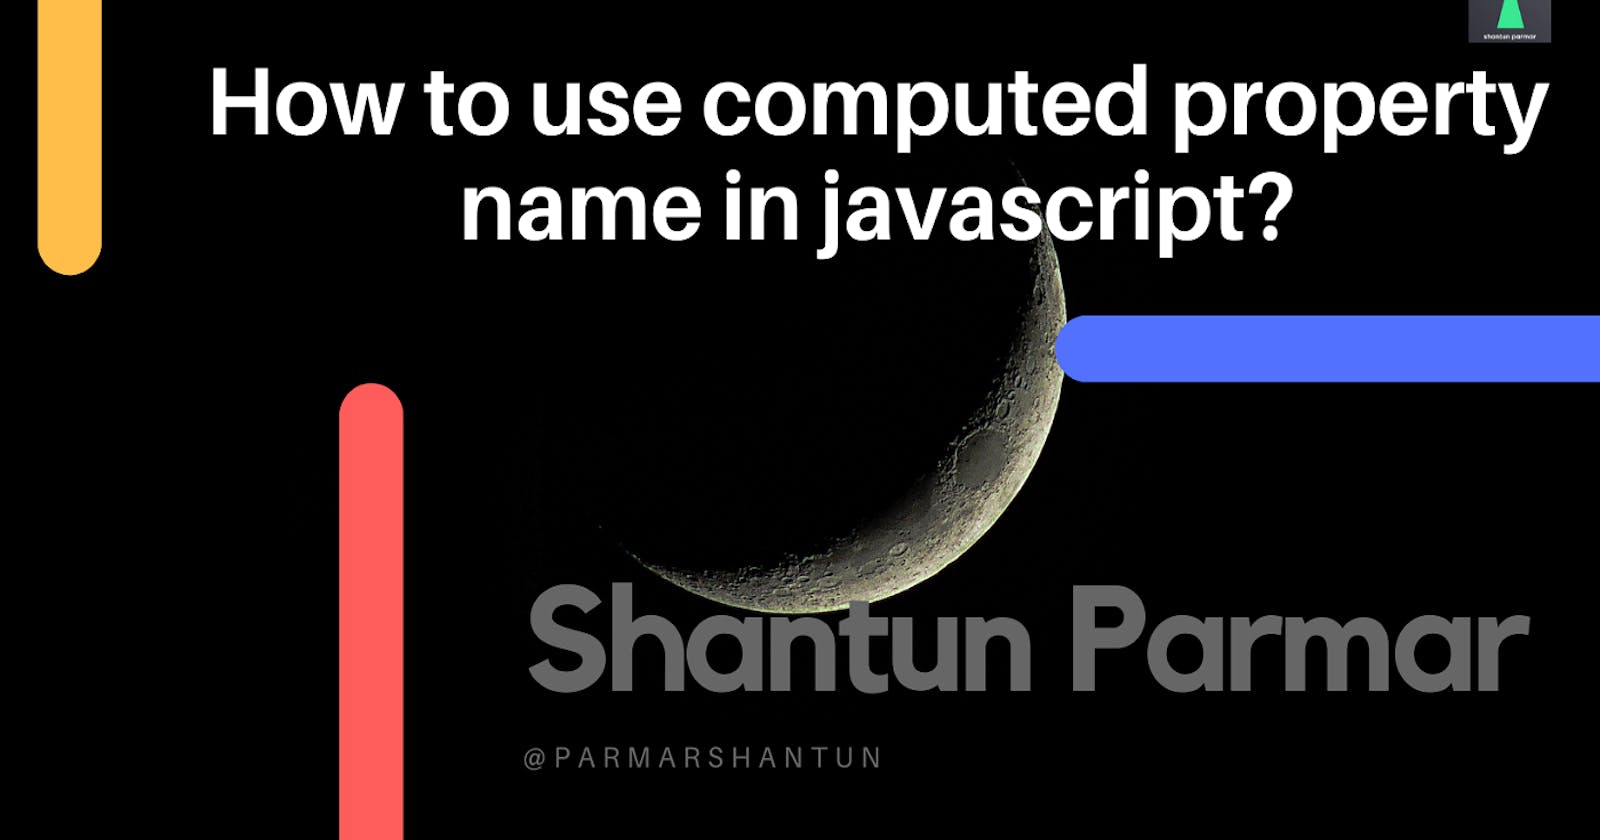 How to use computed property name in javascript?